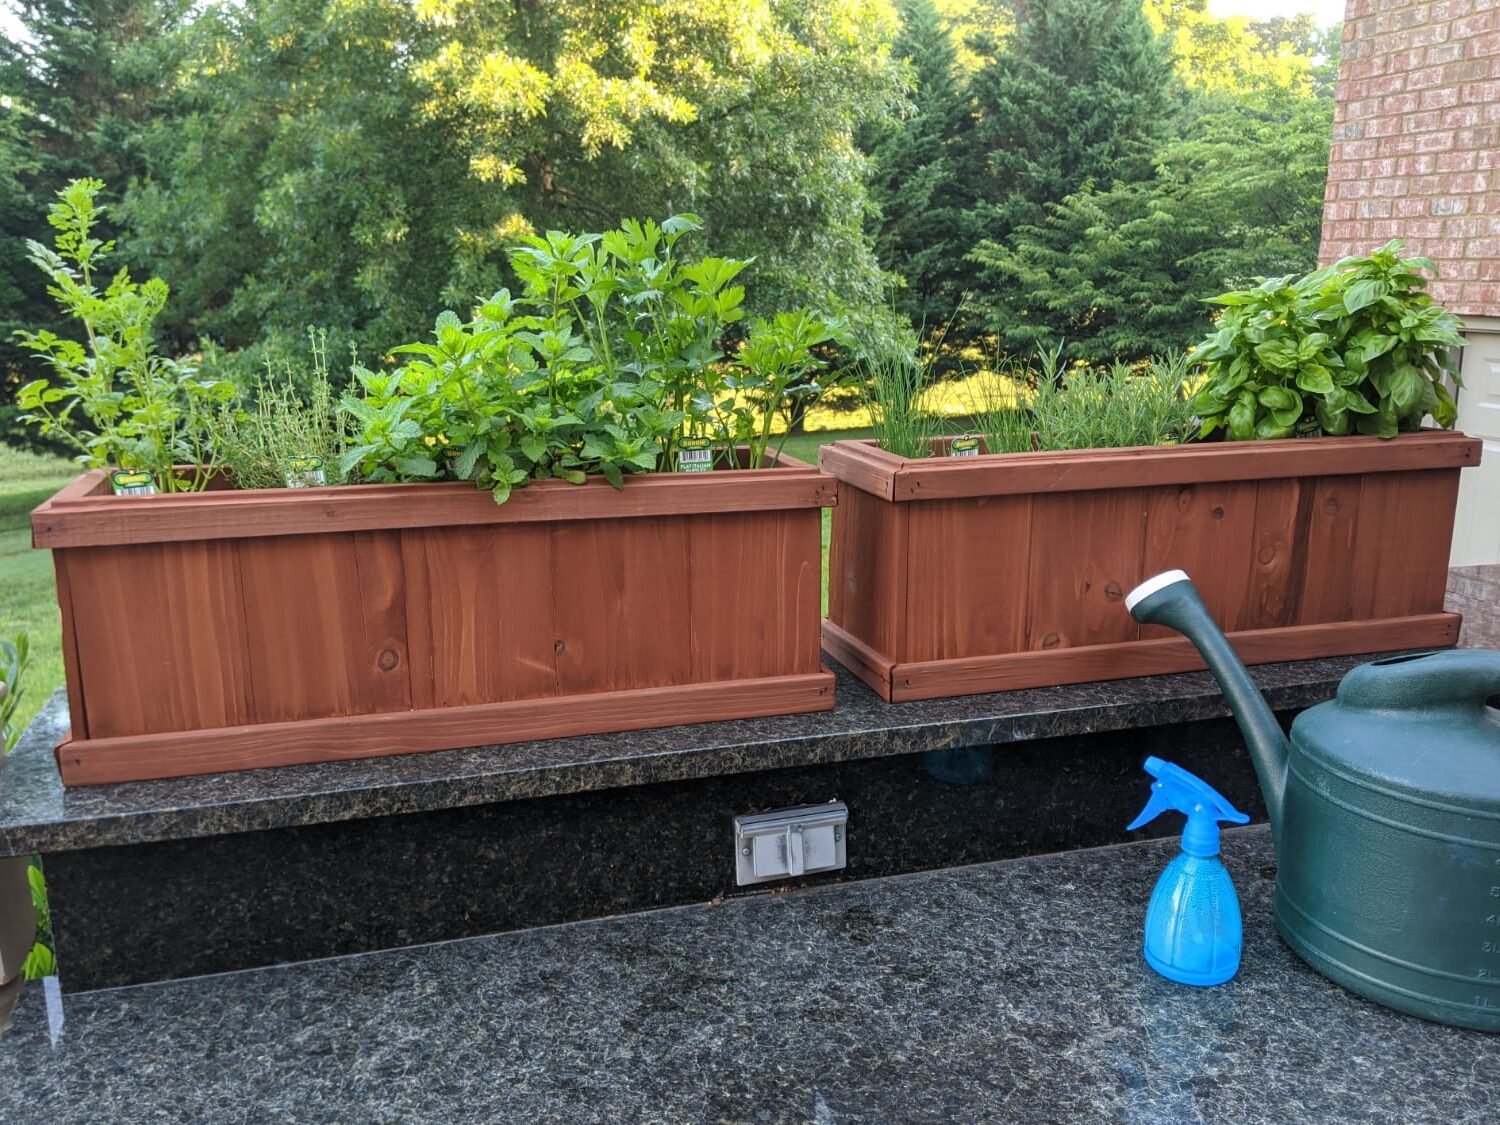 Image of herb garden in 2 planters boxes 